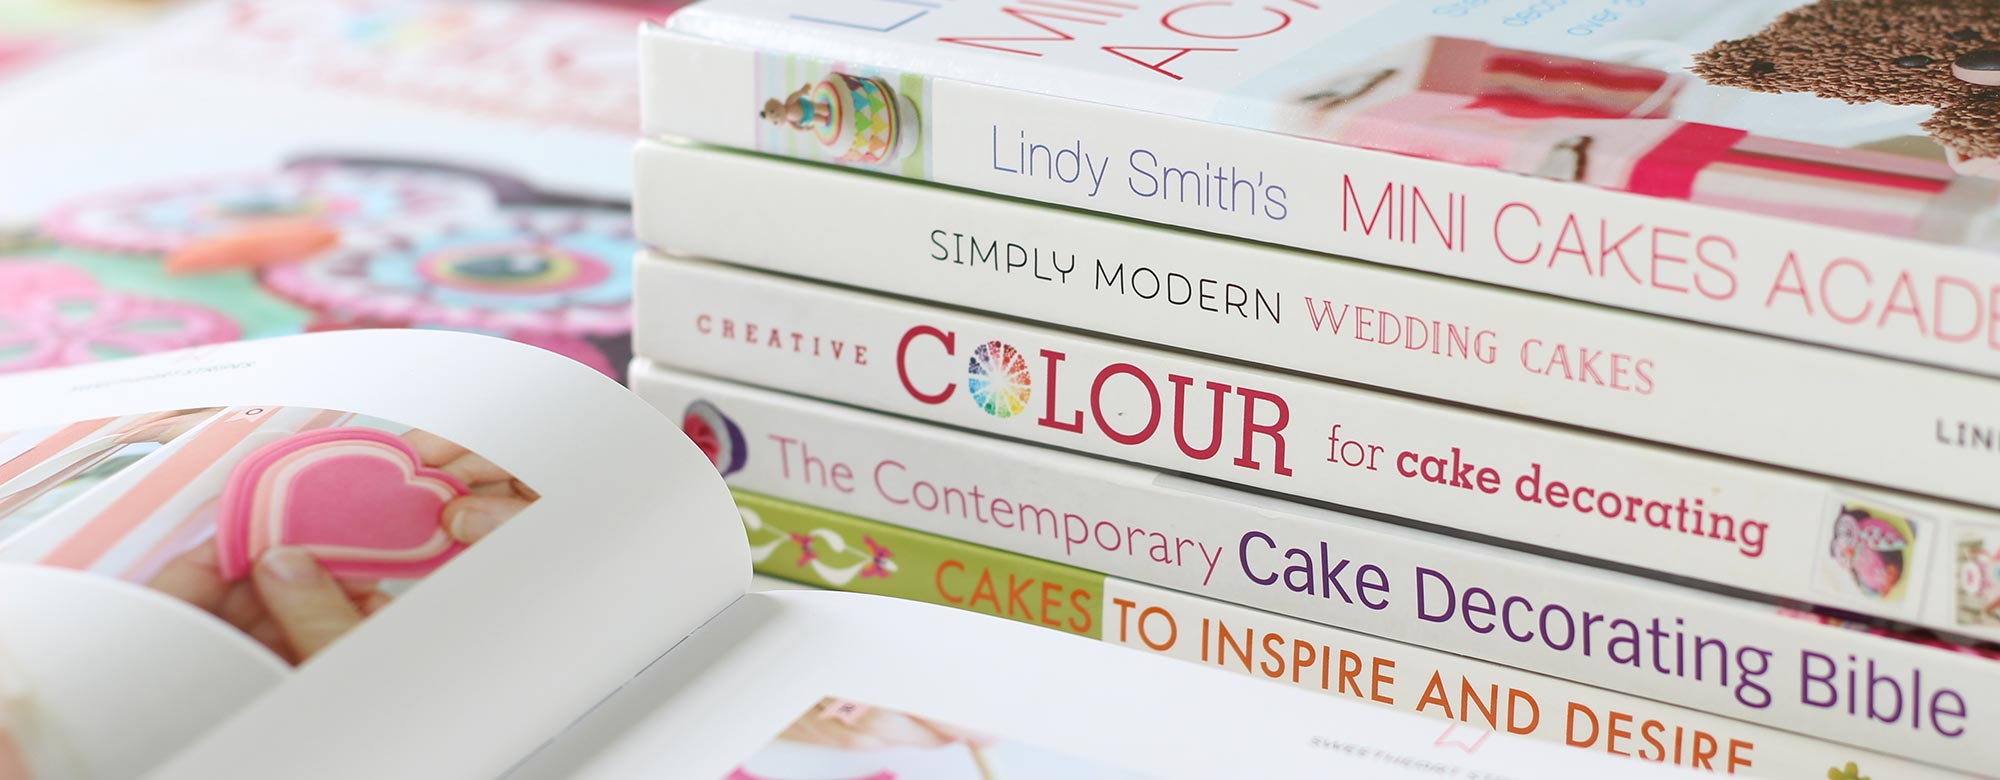 Cake decorating books by Lindy Smith